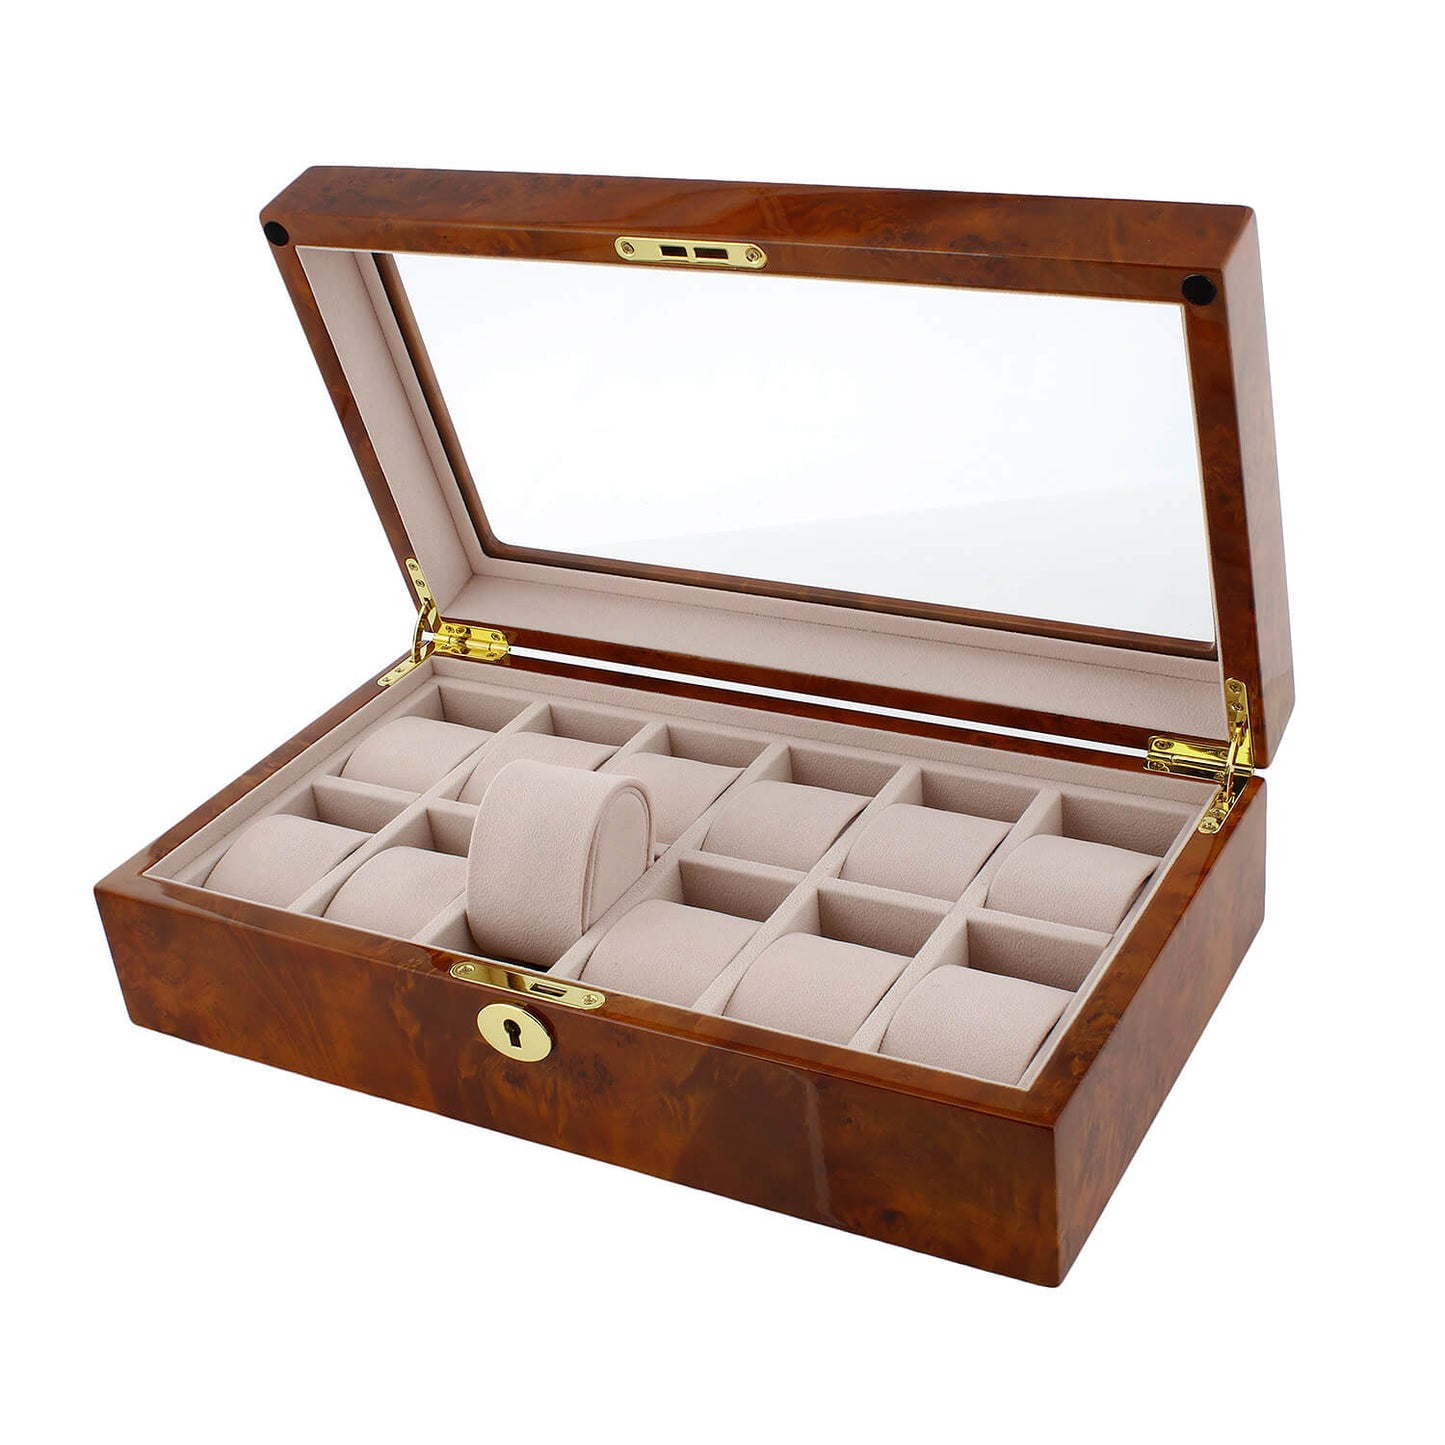 Watch Box for 12 Wrist Watches in Burl Walnut Wood by Aevitas